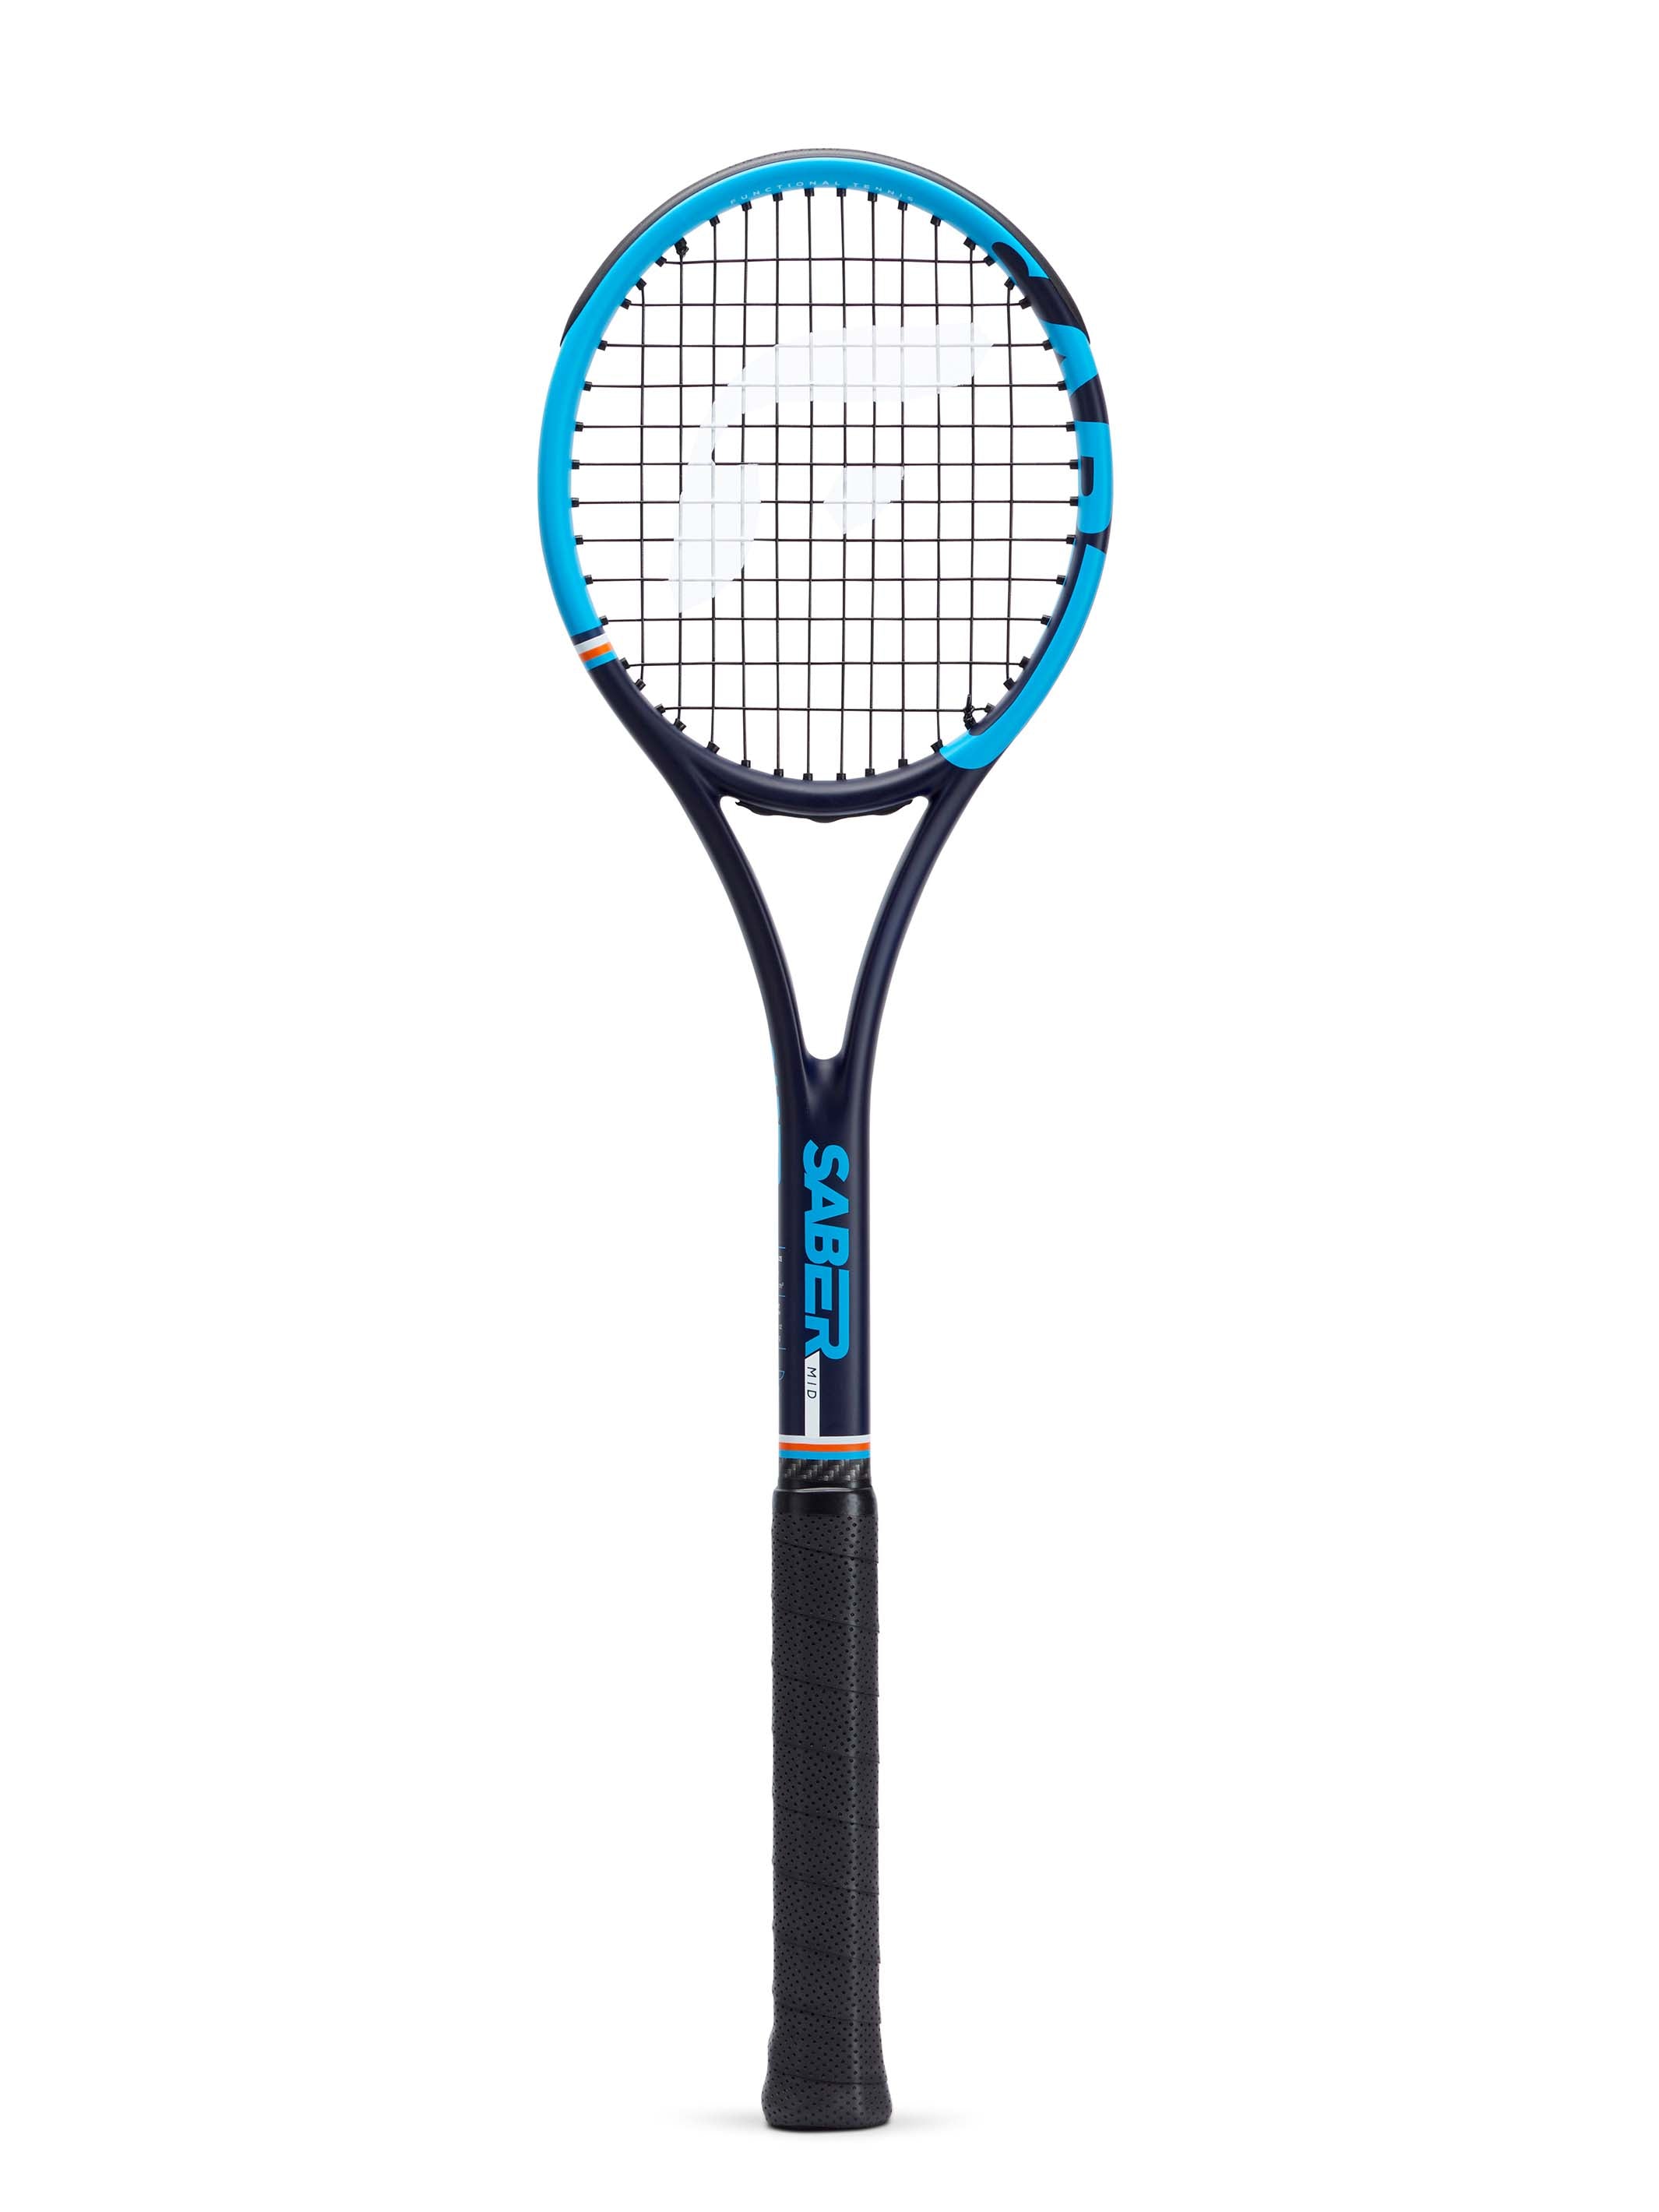 the purpose Lovely Insight Functional Tennis Saber